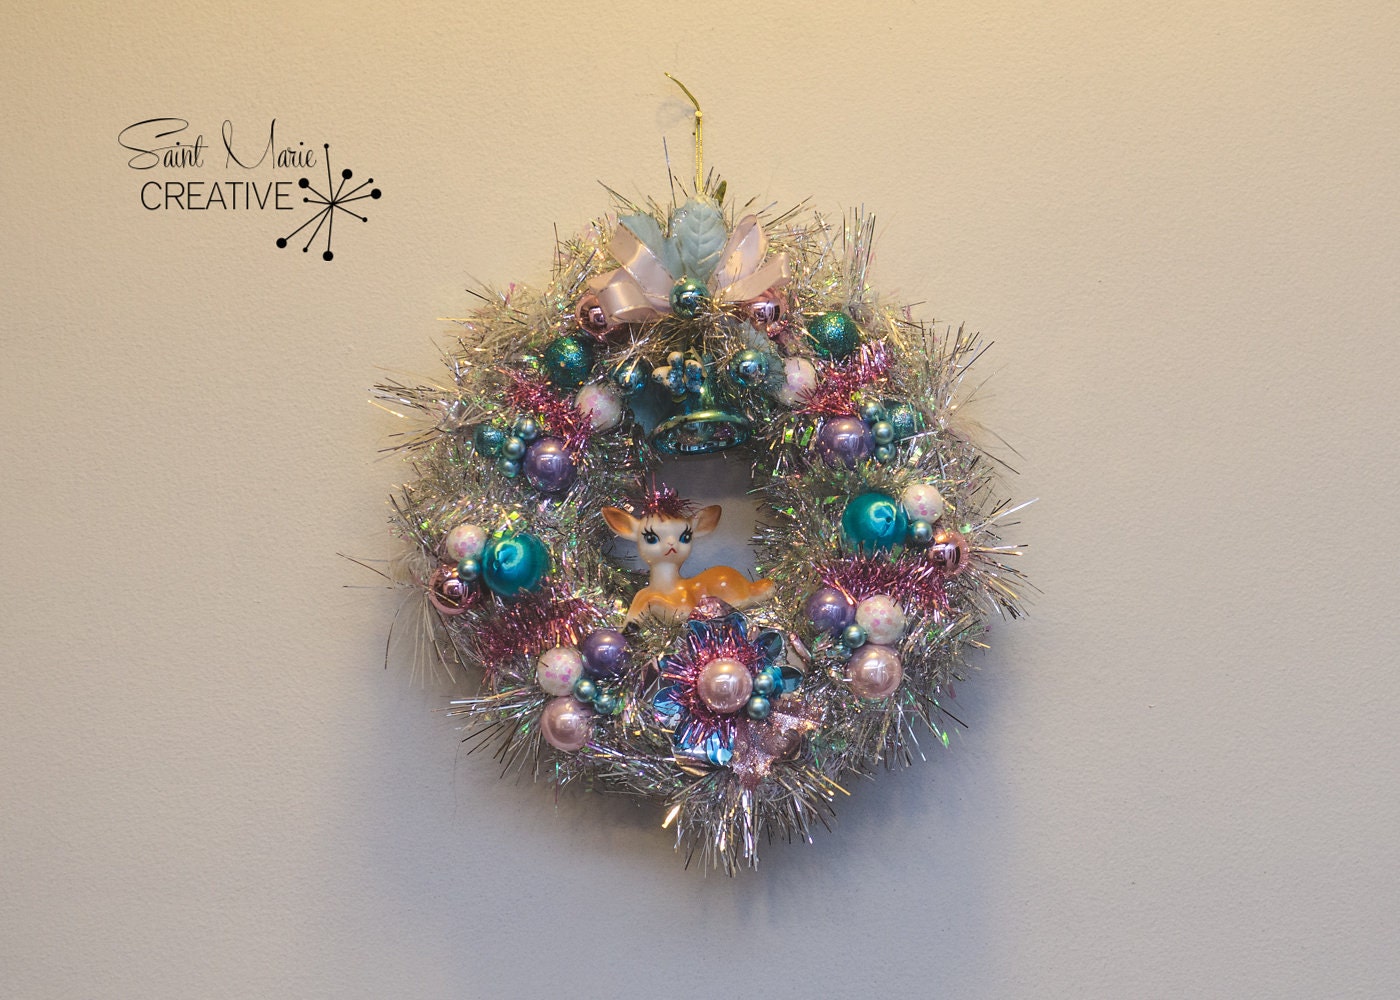 One of my mini creations! This 10" wreath in pinks and blues. Lovely little vintage deer and baby blue vintage corsage.